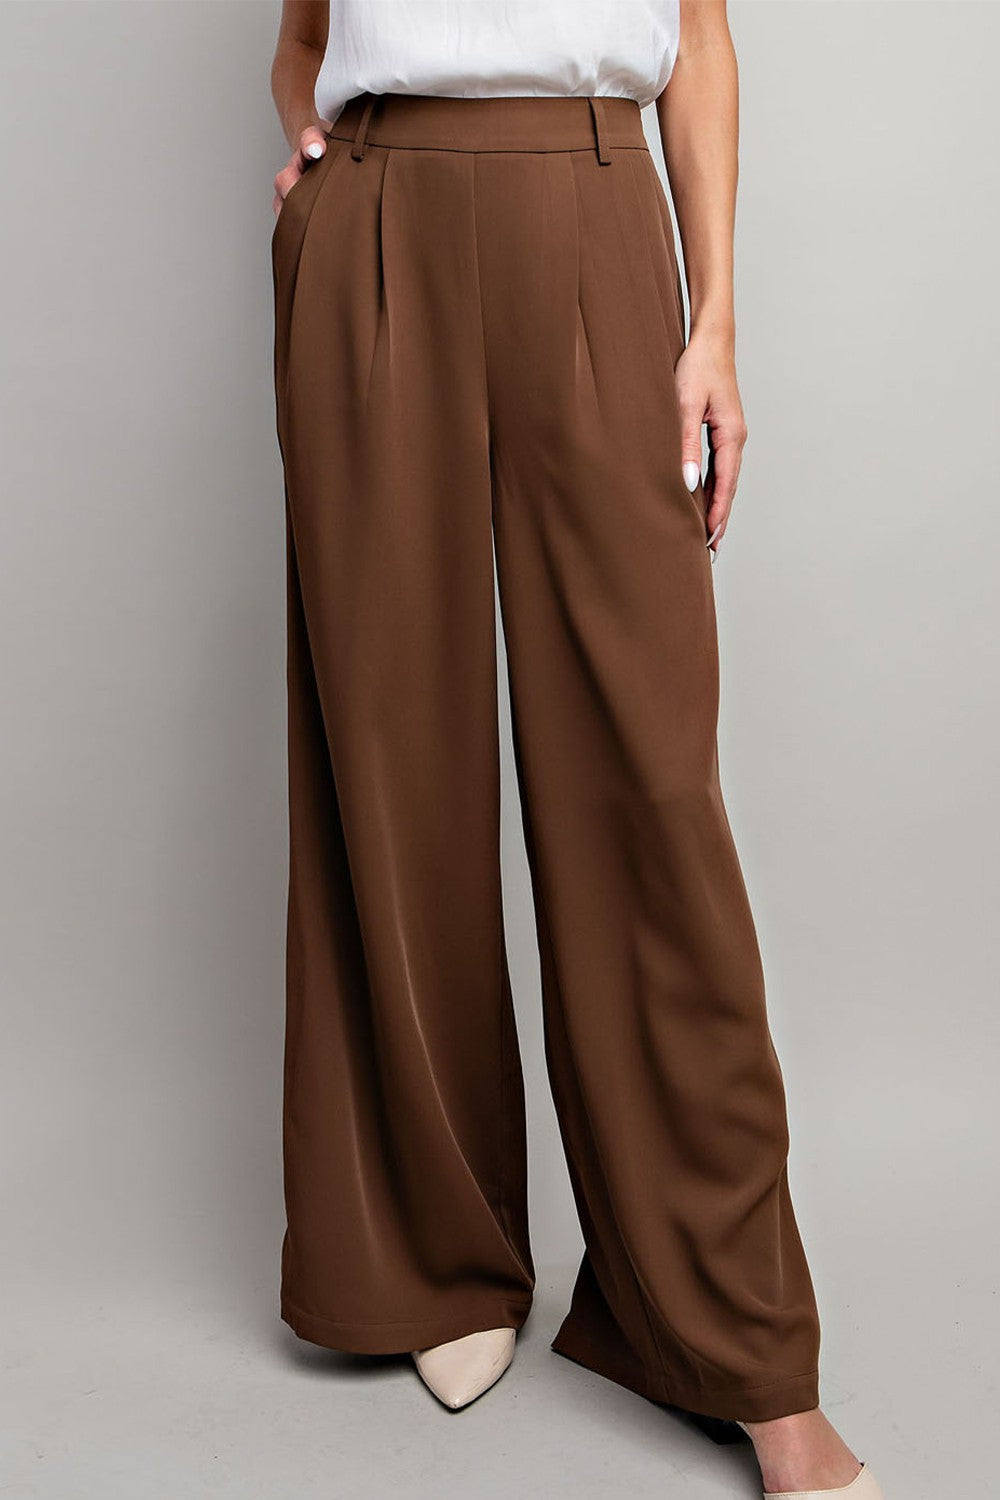 Fall About Brown Trouser Pants